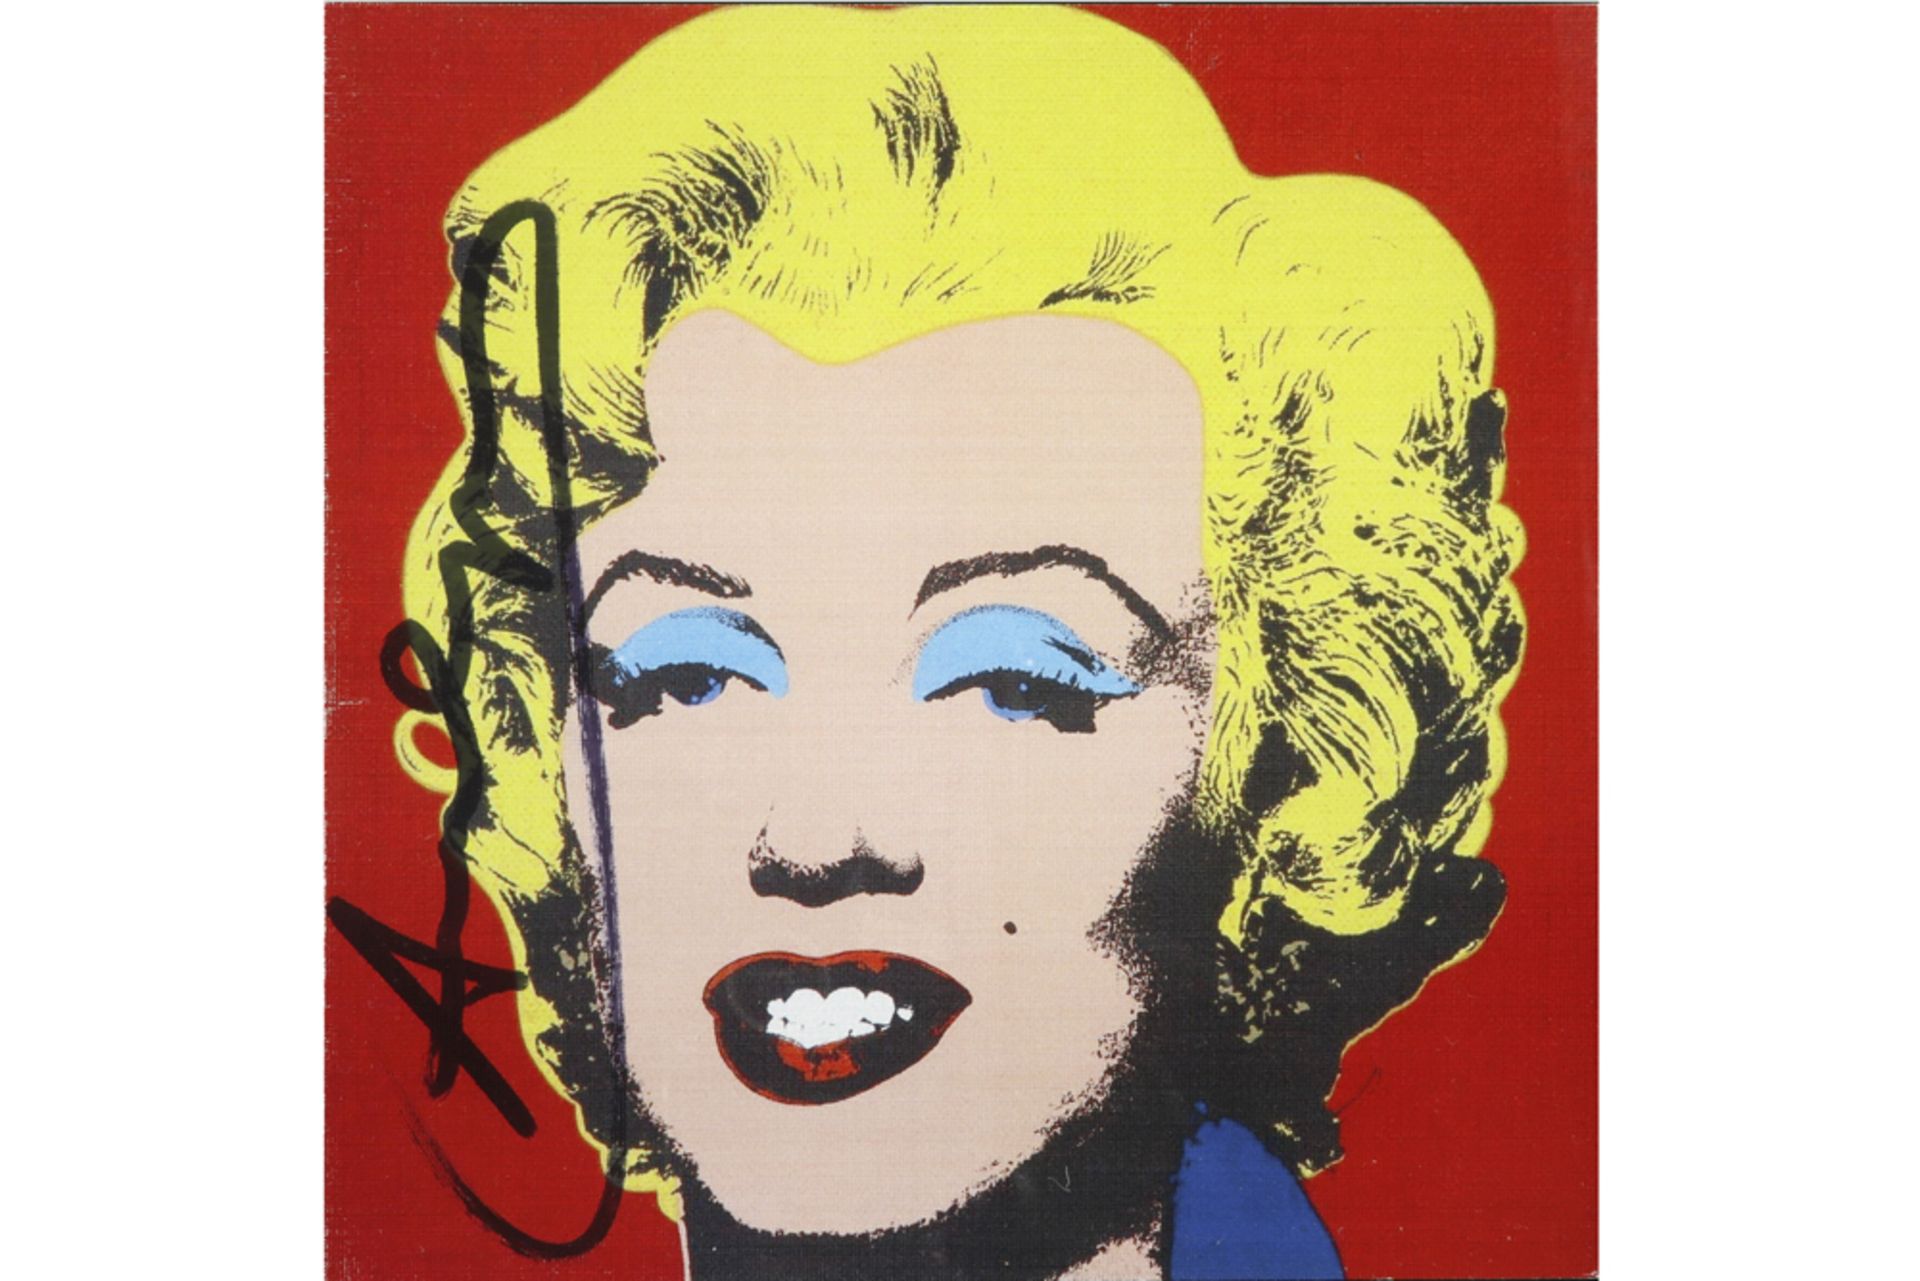 Andy Warhol signed "Marilyn" screenprint on an invitation by Leo Castelli for an exhibition dd